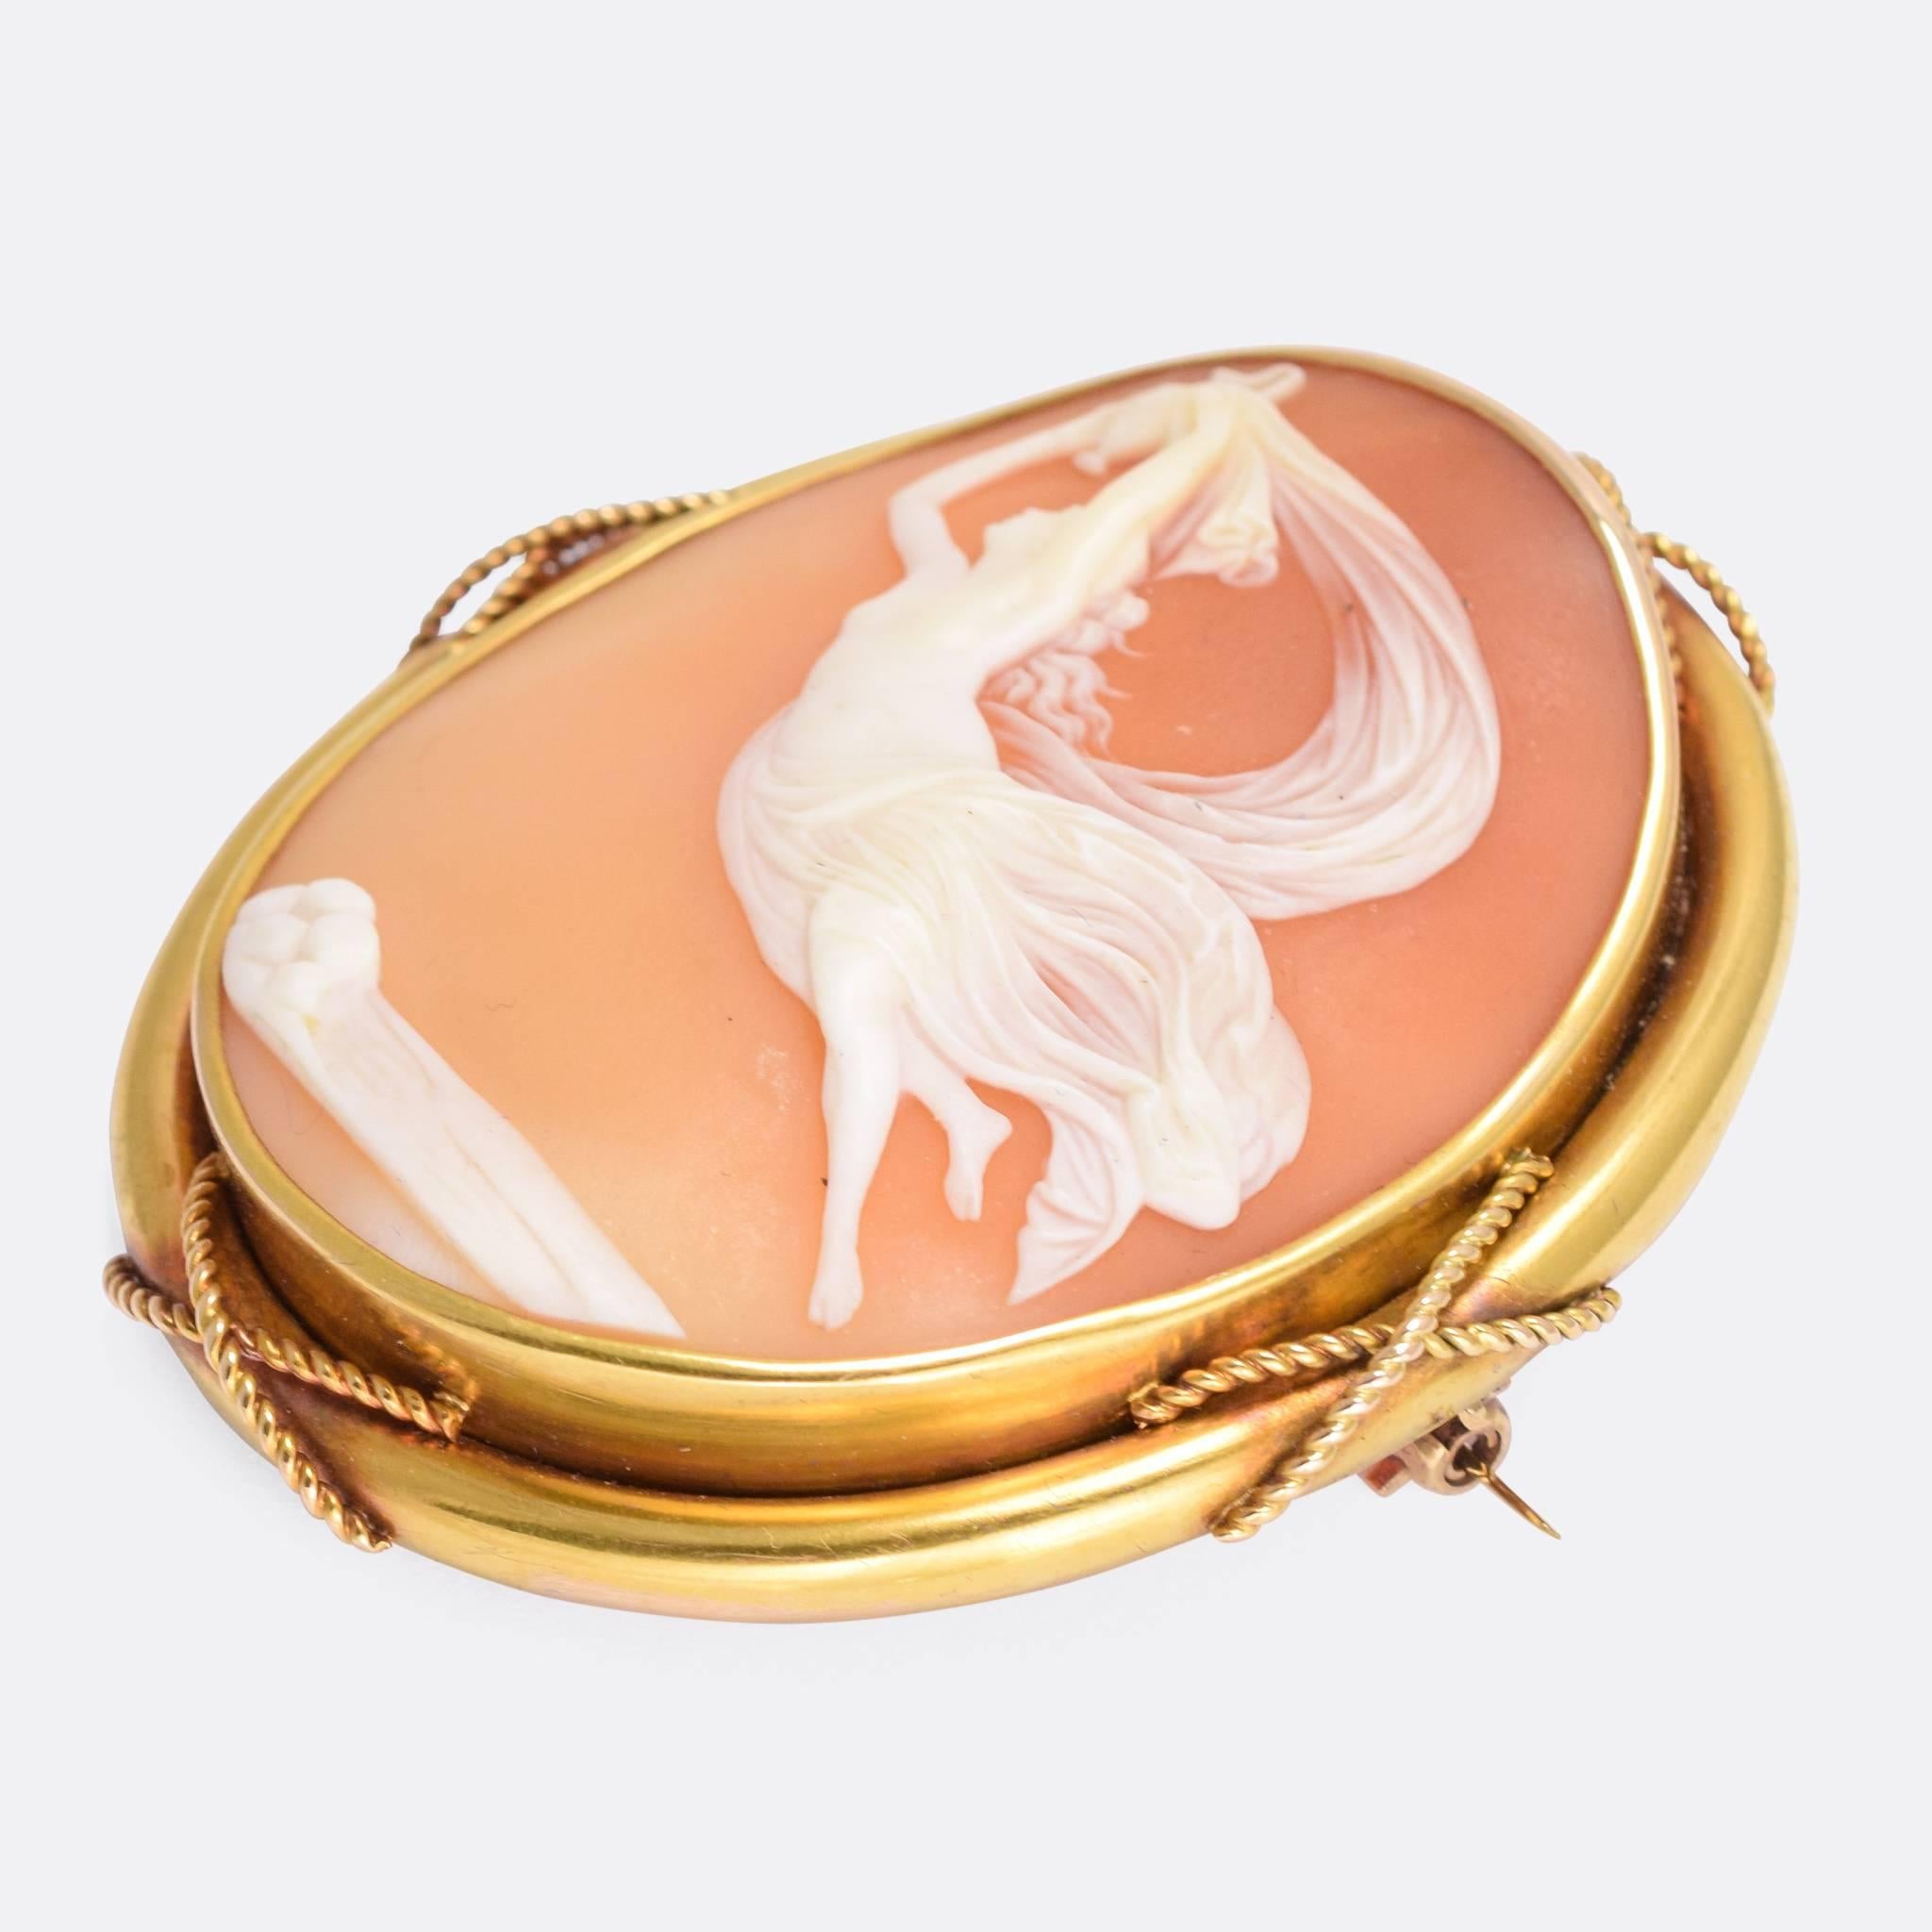 An especially beautiful shell cameo brooch dating from the mid-19th Century. The subject is the Greek goddess Iris, the personification of the rainbow and messenger of the gods. More specifically, it is a re-imagination of the 1793 painting 